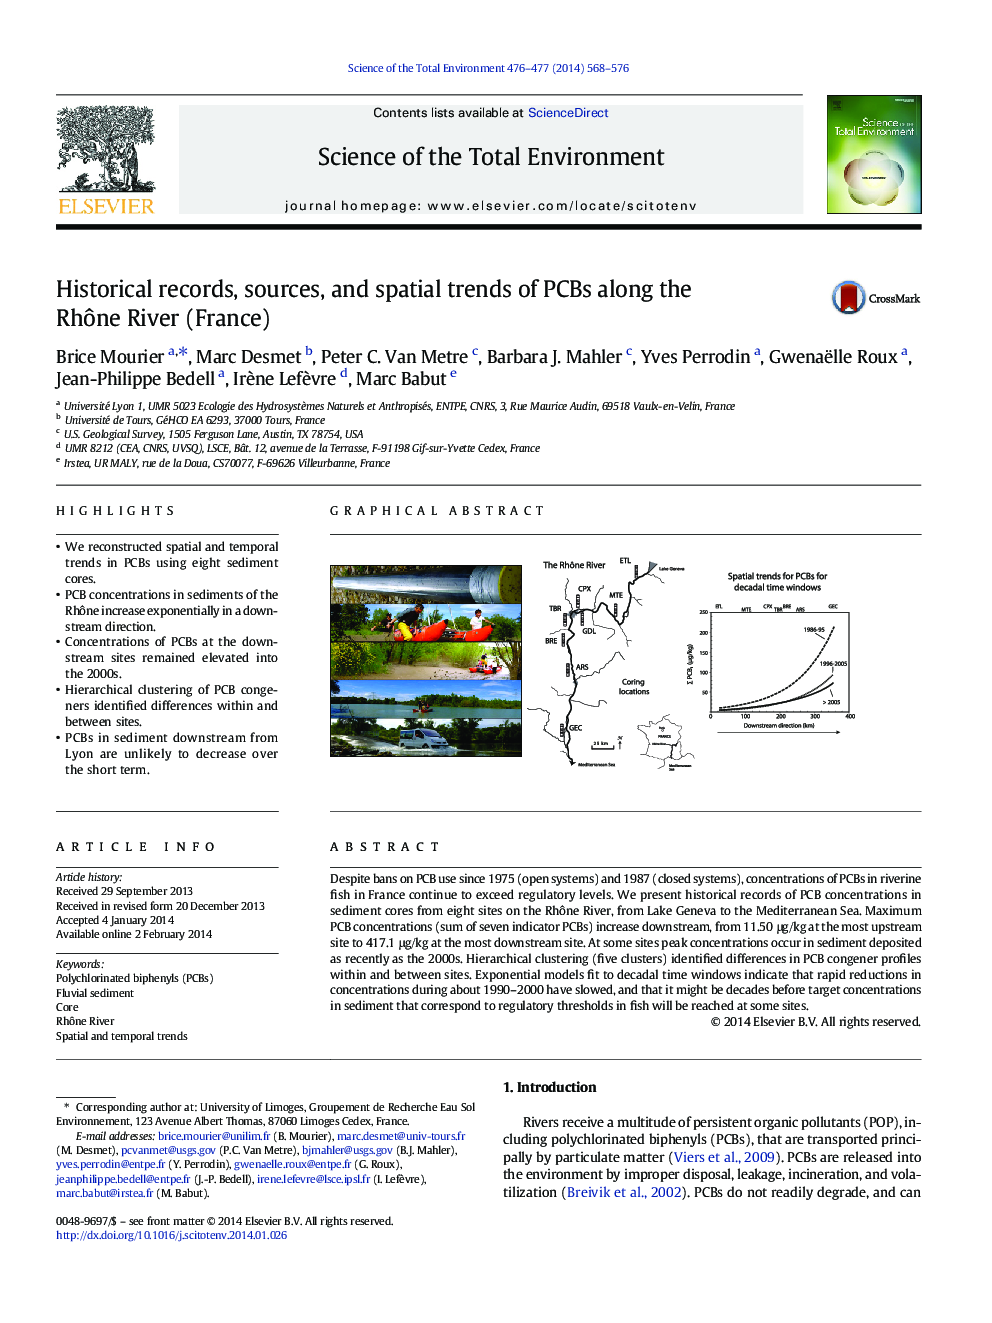 Historical records, sources, and spatial trends of PCBs along the Rhône River (France)